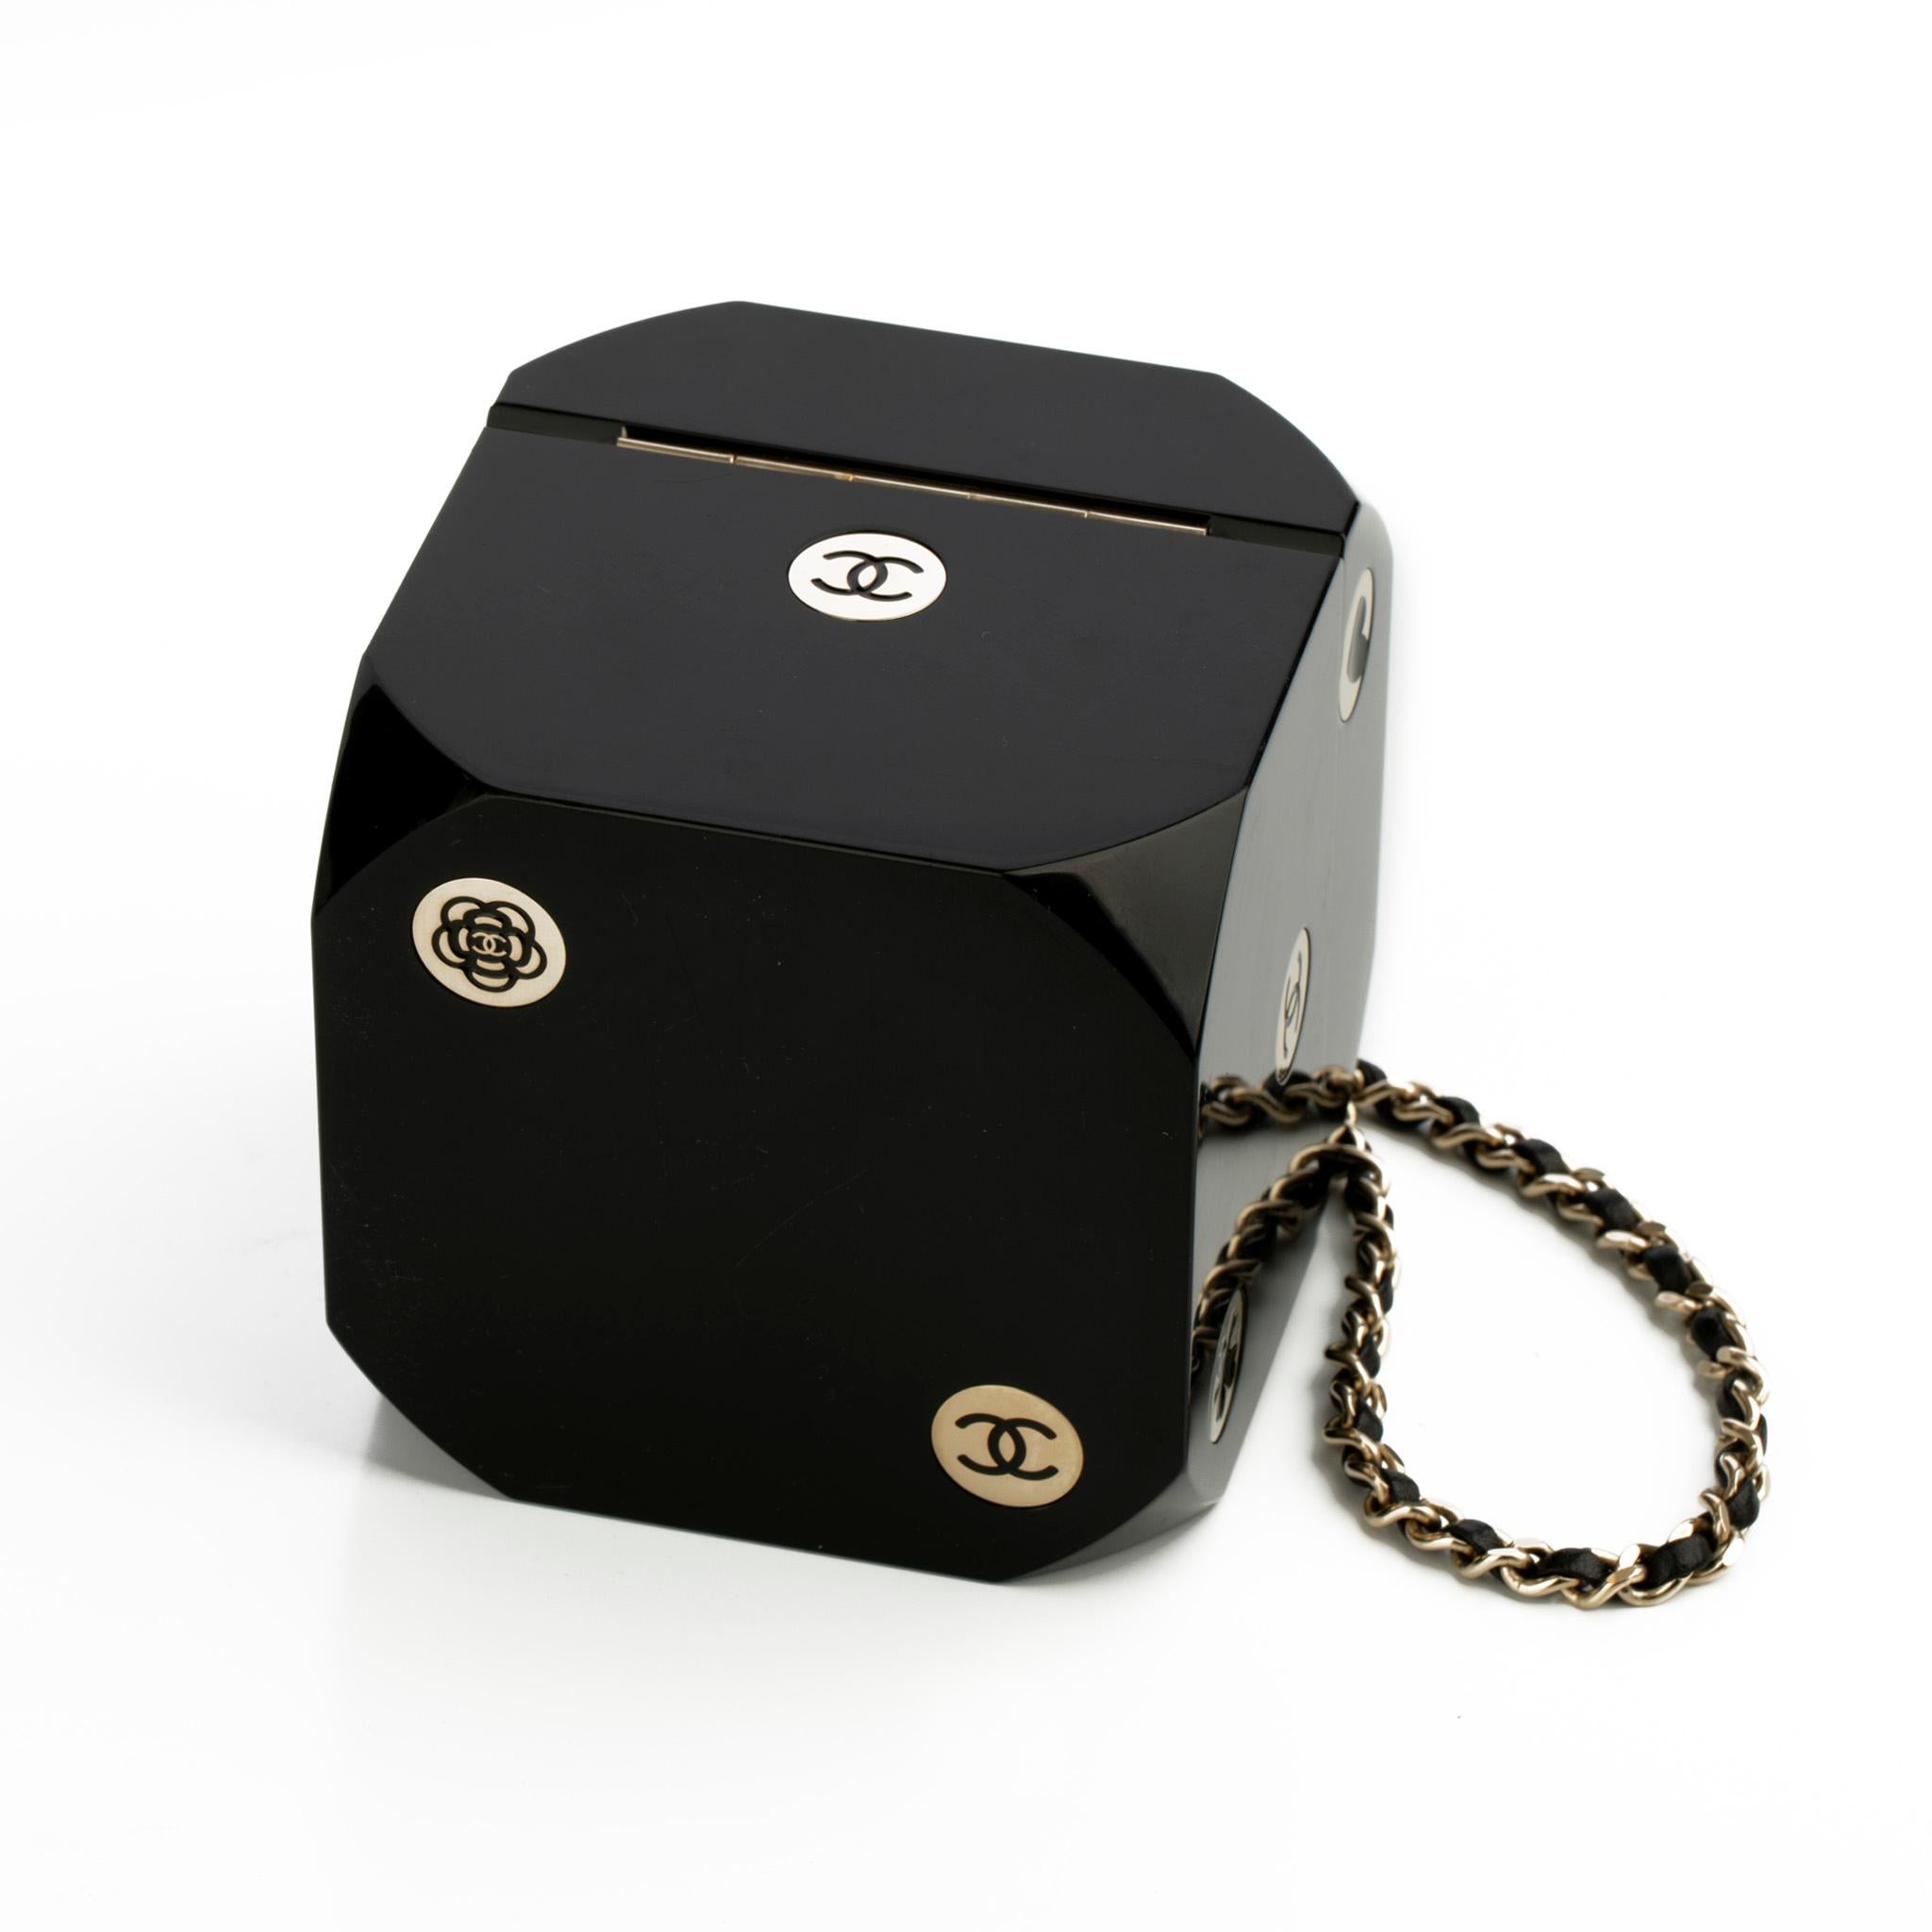 Chanel Minaudière Limited Edition Casino Dice Black Gold-Tone Hardware For Sale 4